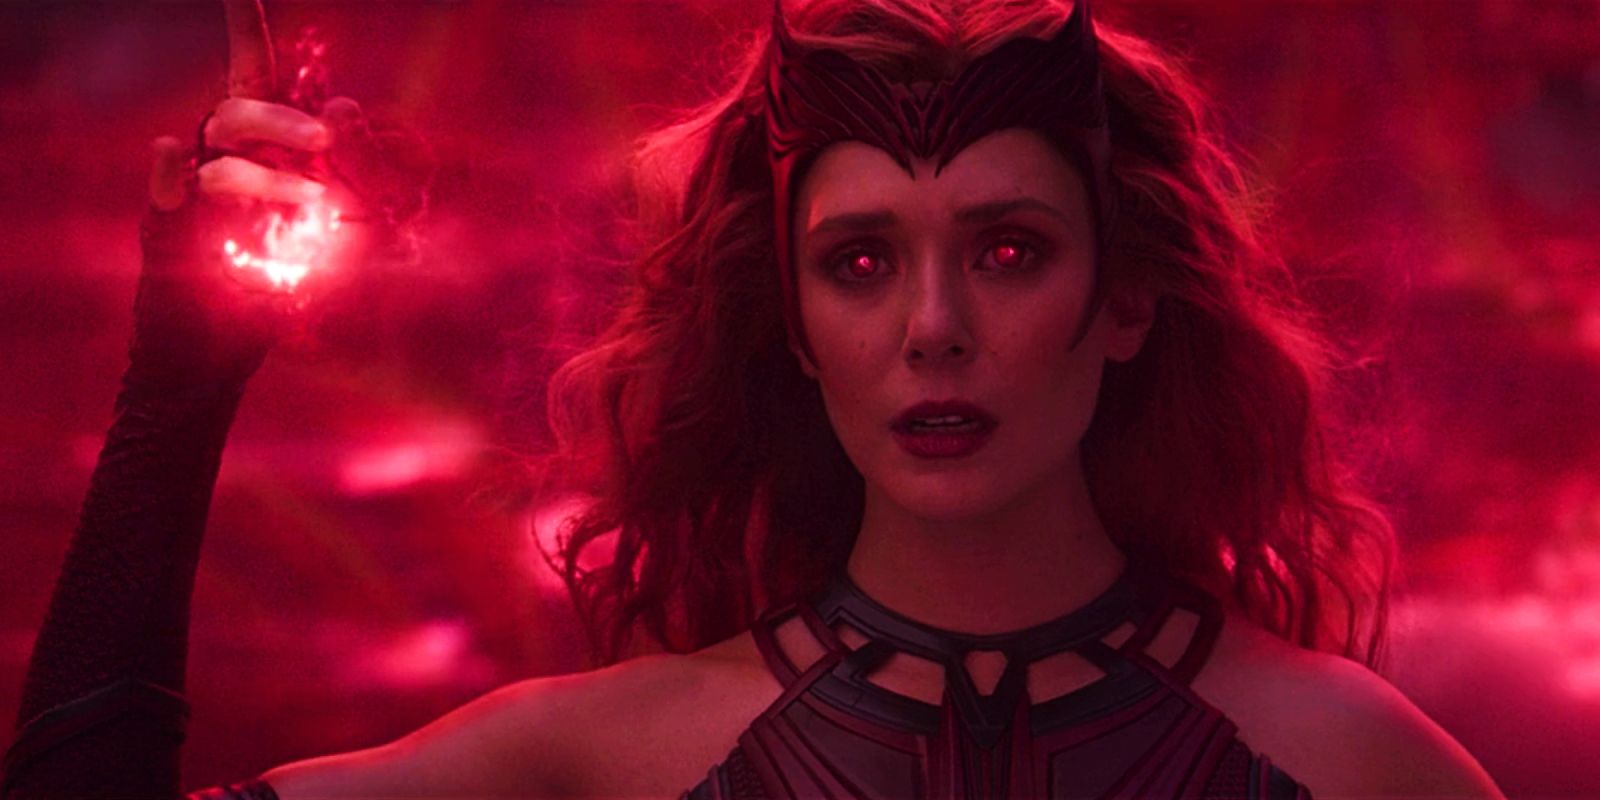 Wanda becoming the Scarlet Witch in Wandavision